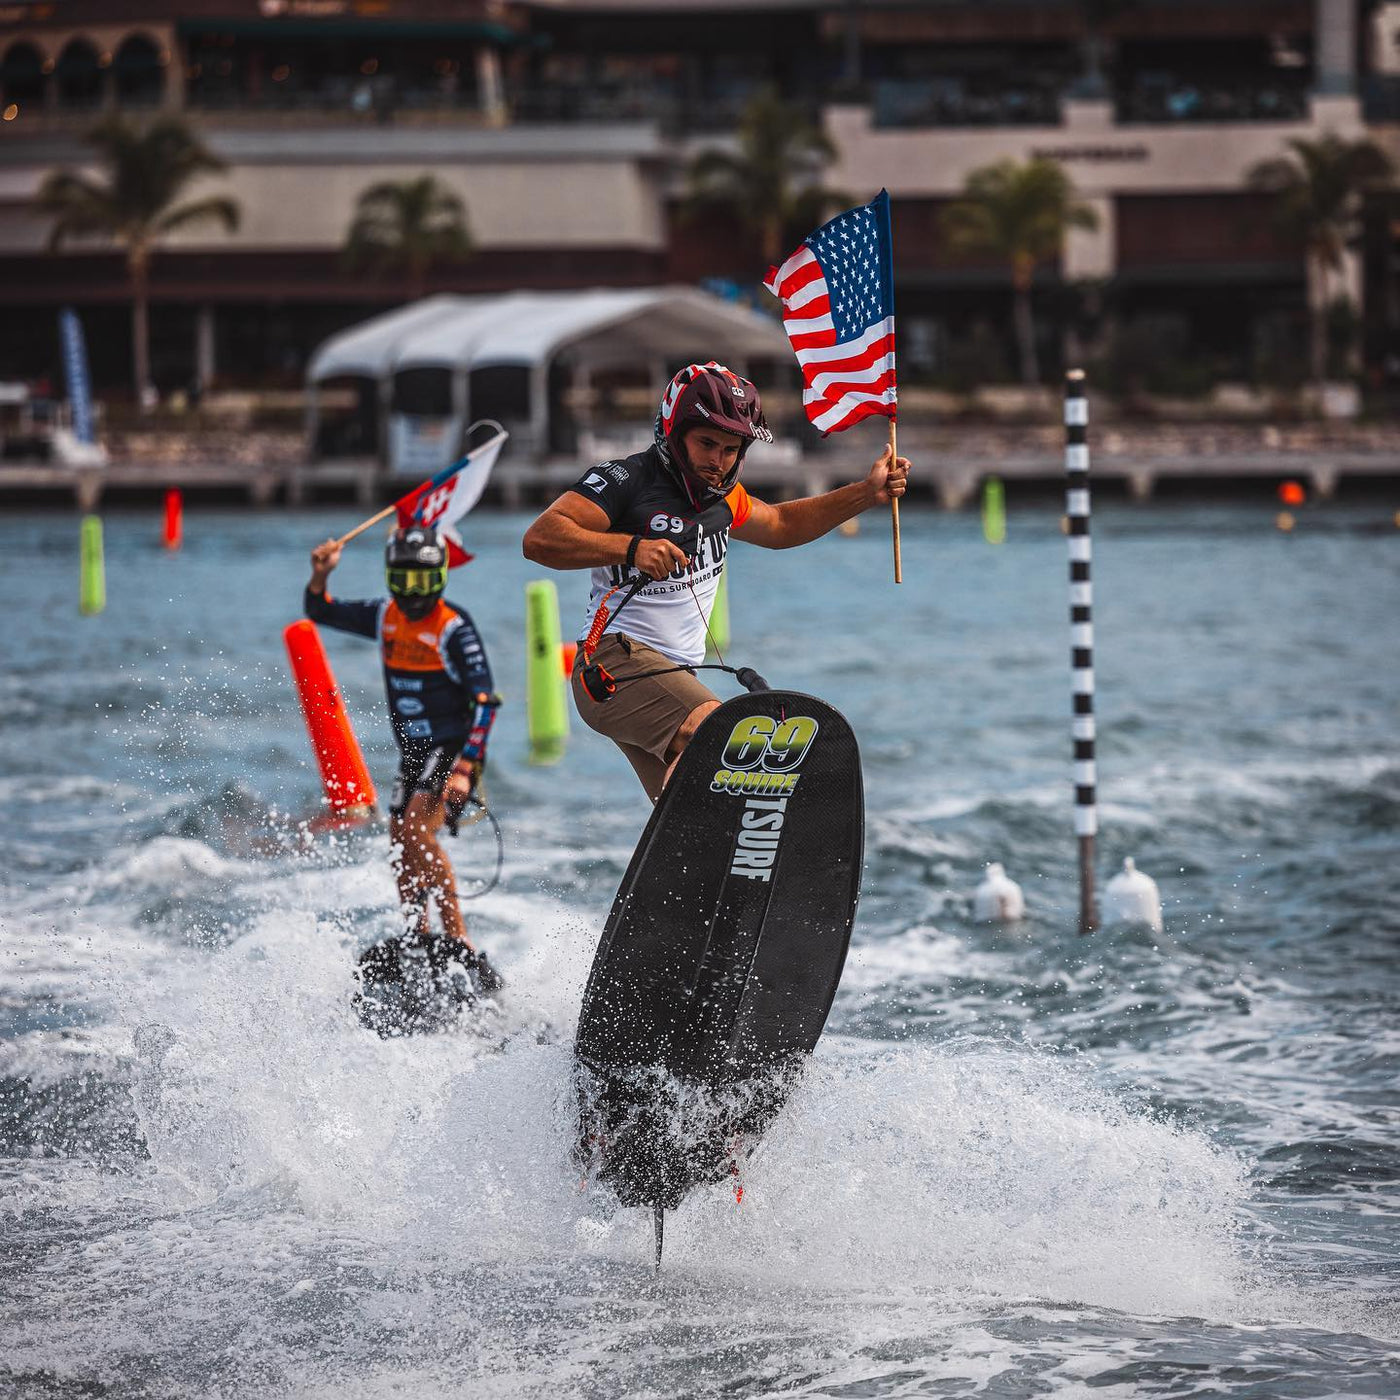 Squire finished 7th overall at MSWC race in Cancún, MX | Check this online at JETSURFUSA.COM